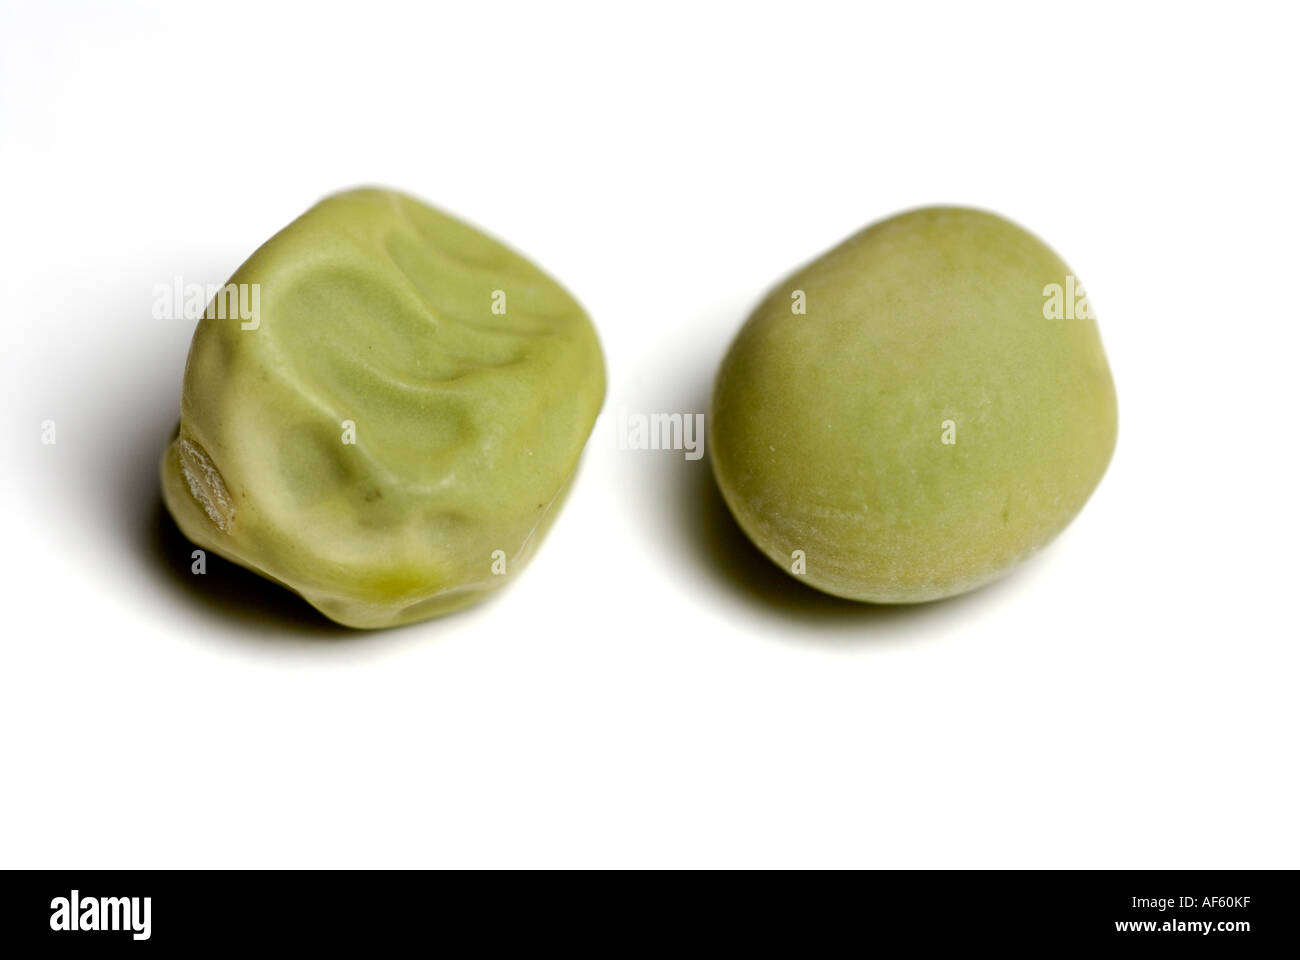 Green smooth and wrinkled pea seeds, traits Gregor Mendel studied in his genetics heredity experiments. Stock Photo